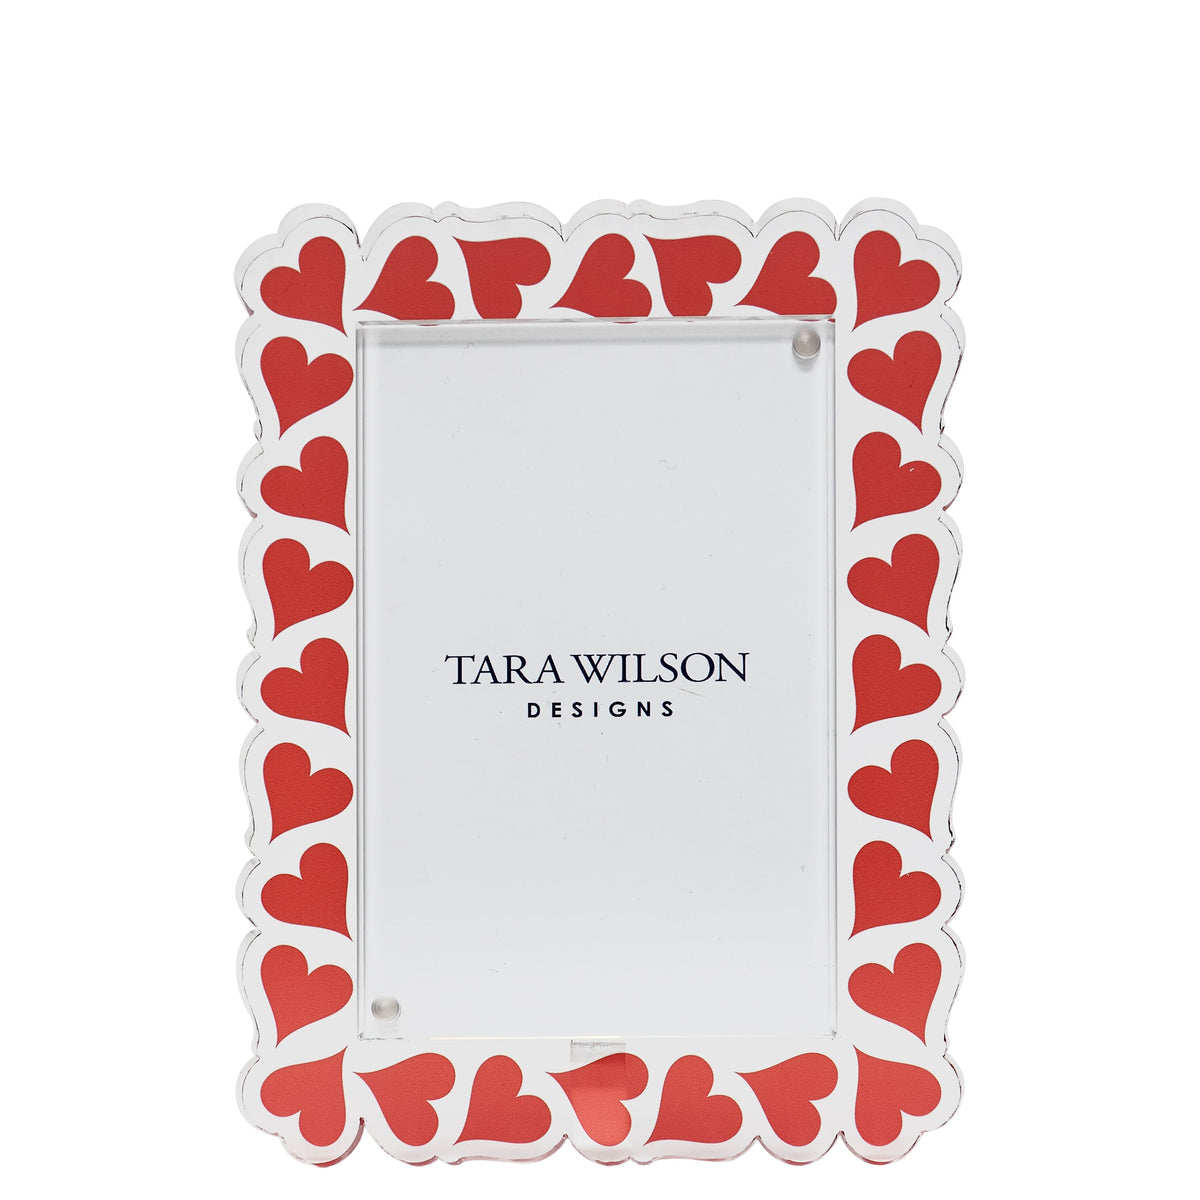 Frame WORD PRINTED Red Hearts 4 inches by 6 inches